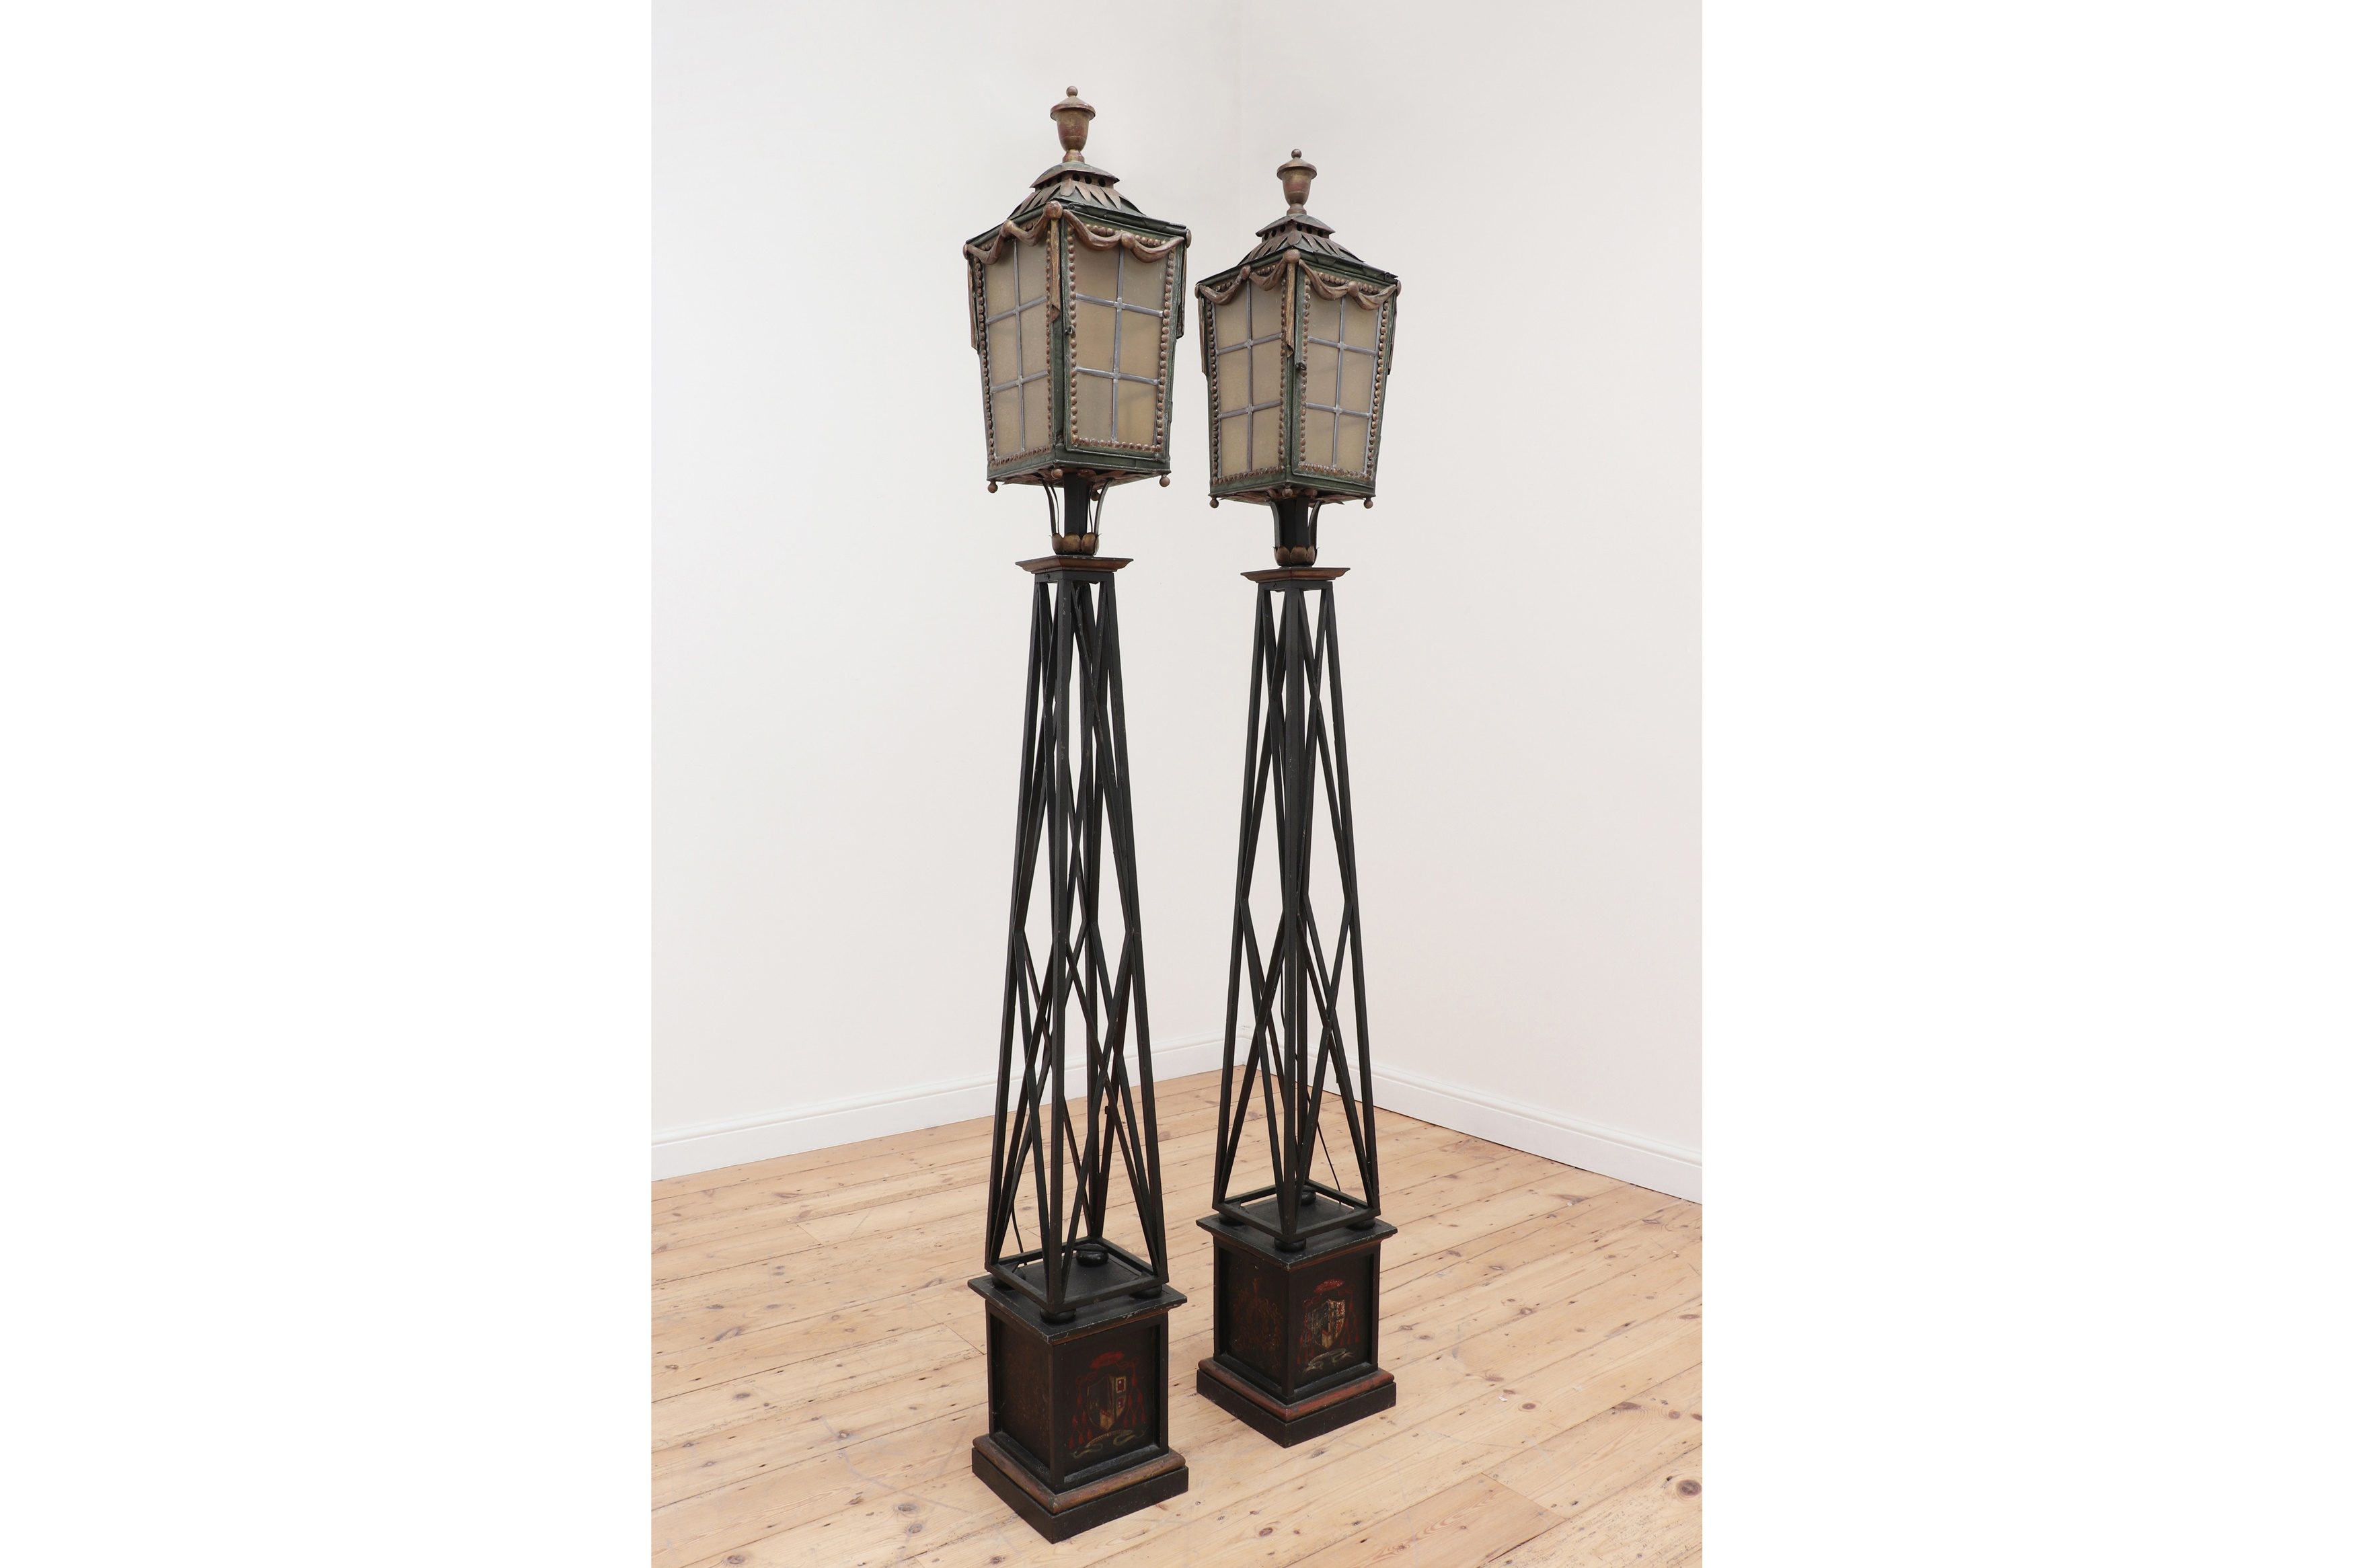 A pair of polychrome-painted toleware lanterns